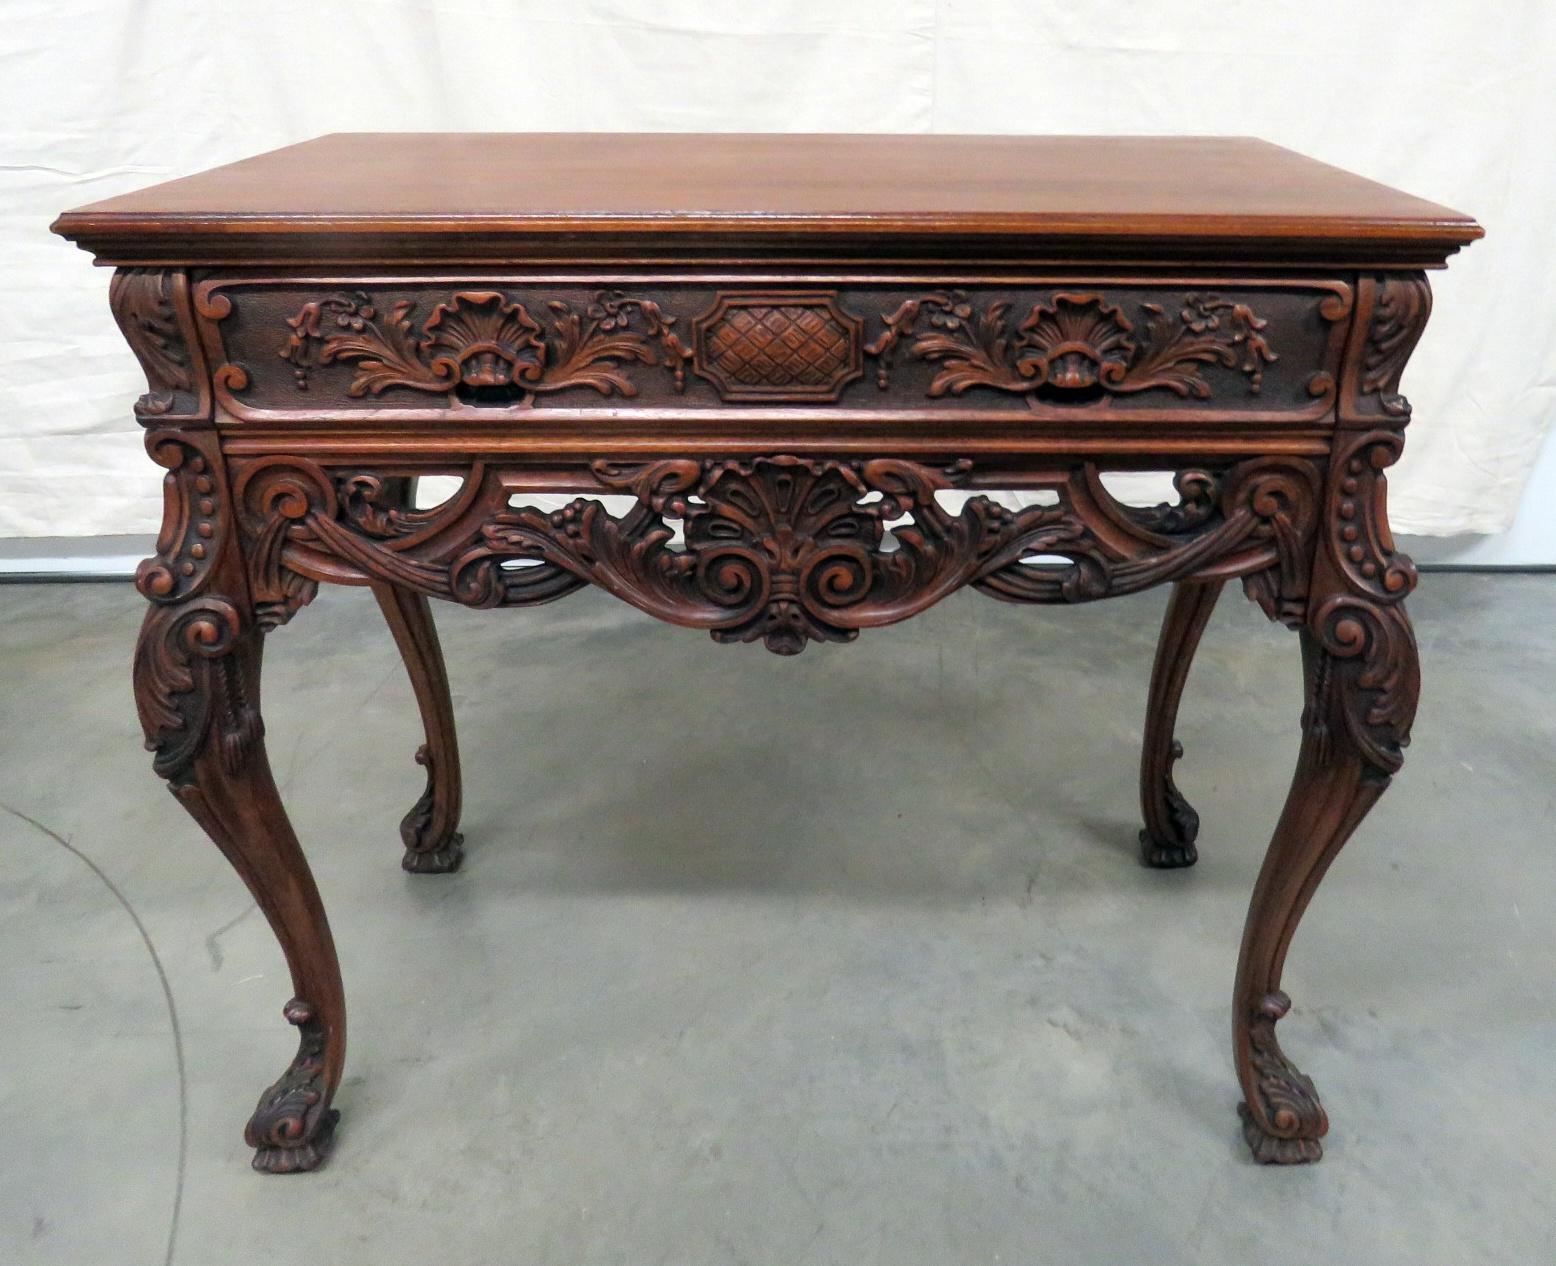 This is a gorgeous heavily carved server or buffet with incredible carving and attention to detail. The piece is a perfect mate to a larger sideboard listed separately. 